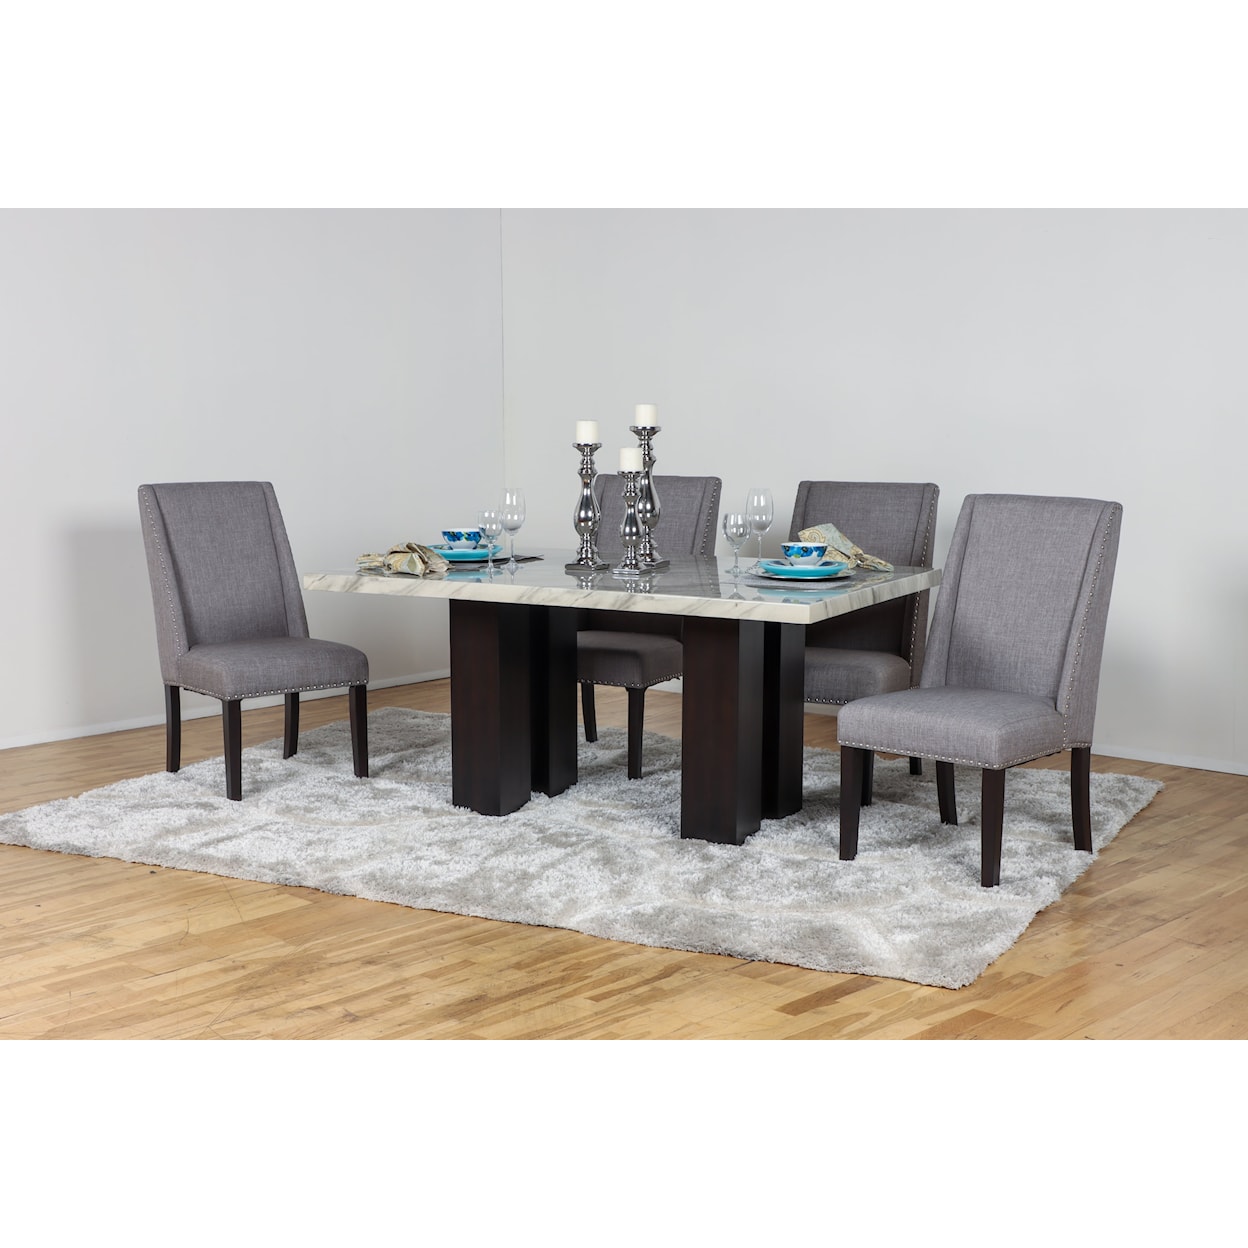 New Classic Faust Dining Table